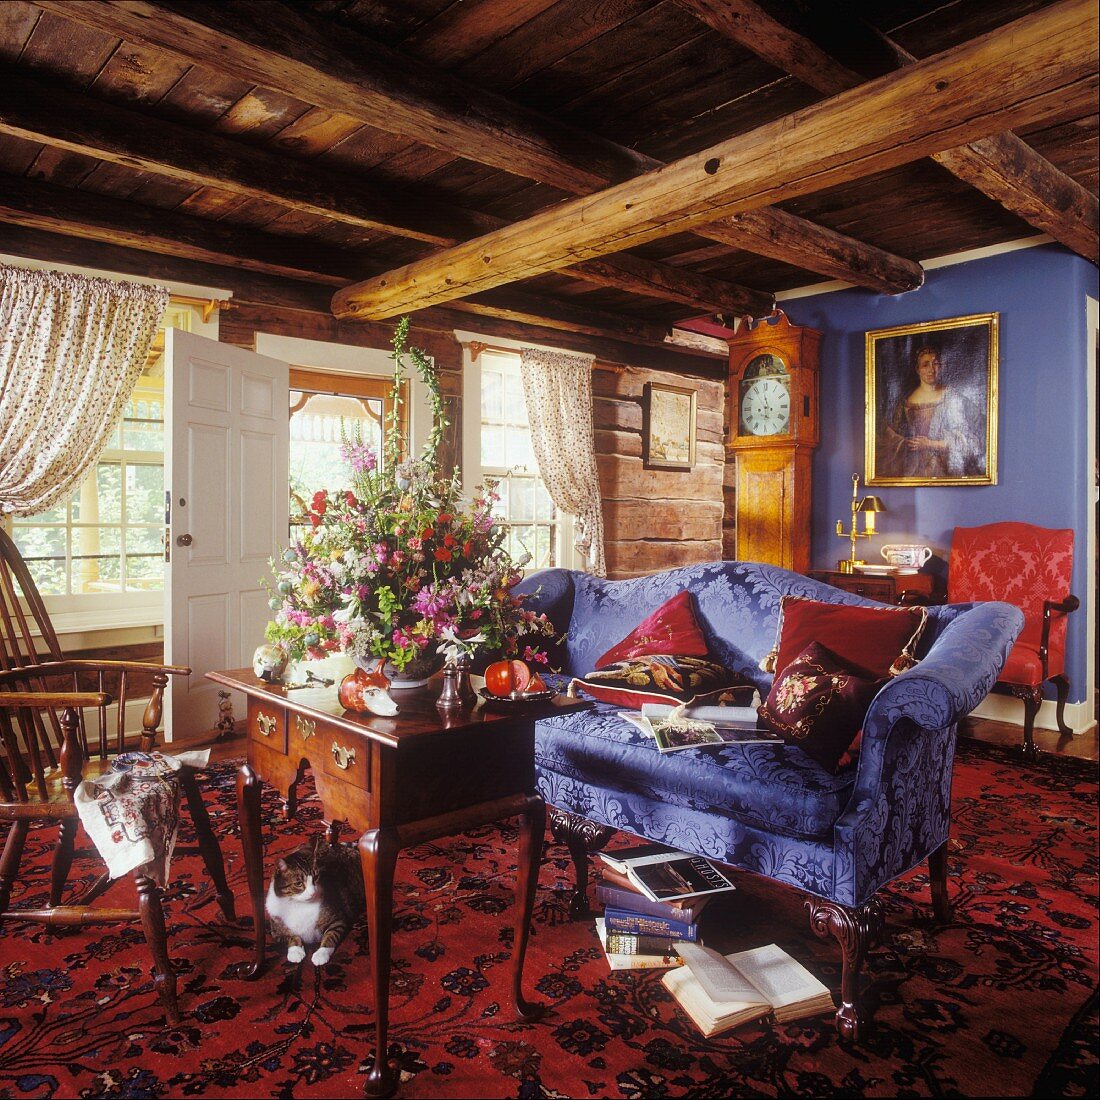 Living room with rustic beamed ceiling, blue sofa, lowboy table and Oriental rug